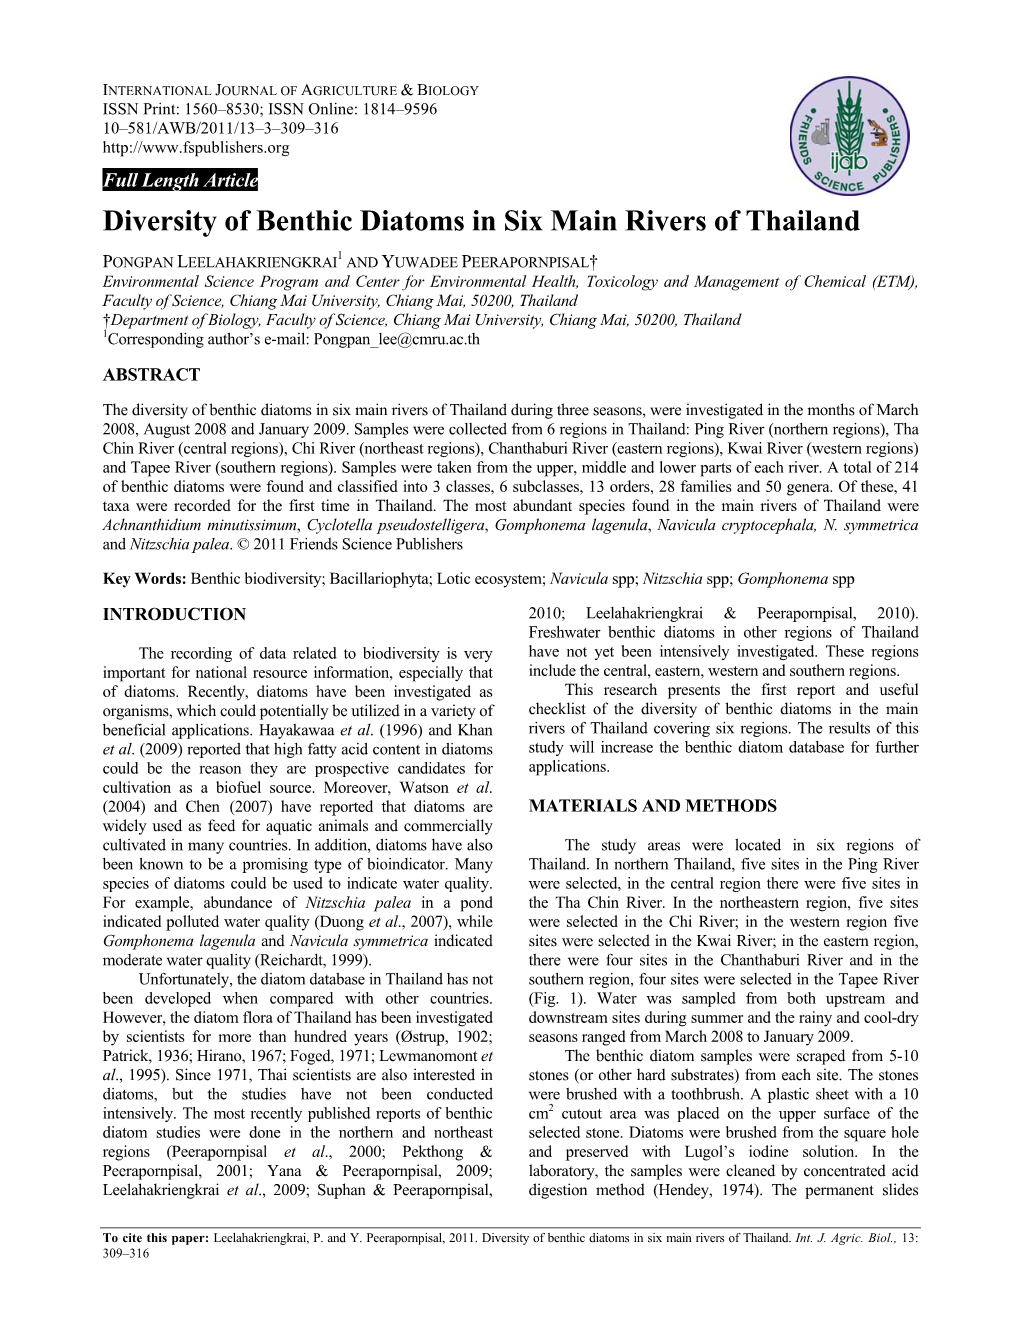 Diversity of Benthic Diatoms in Six Main Rivers of Thailand